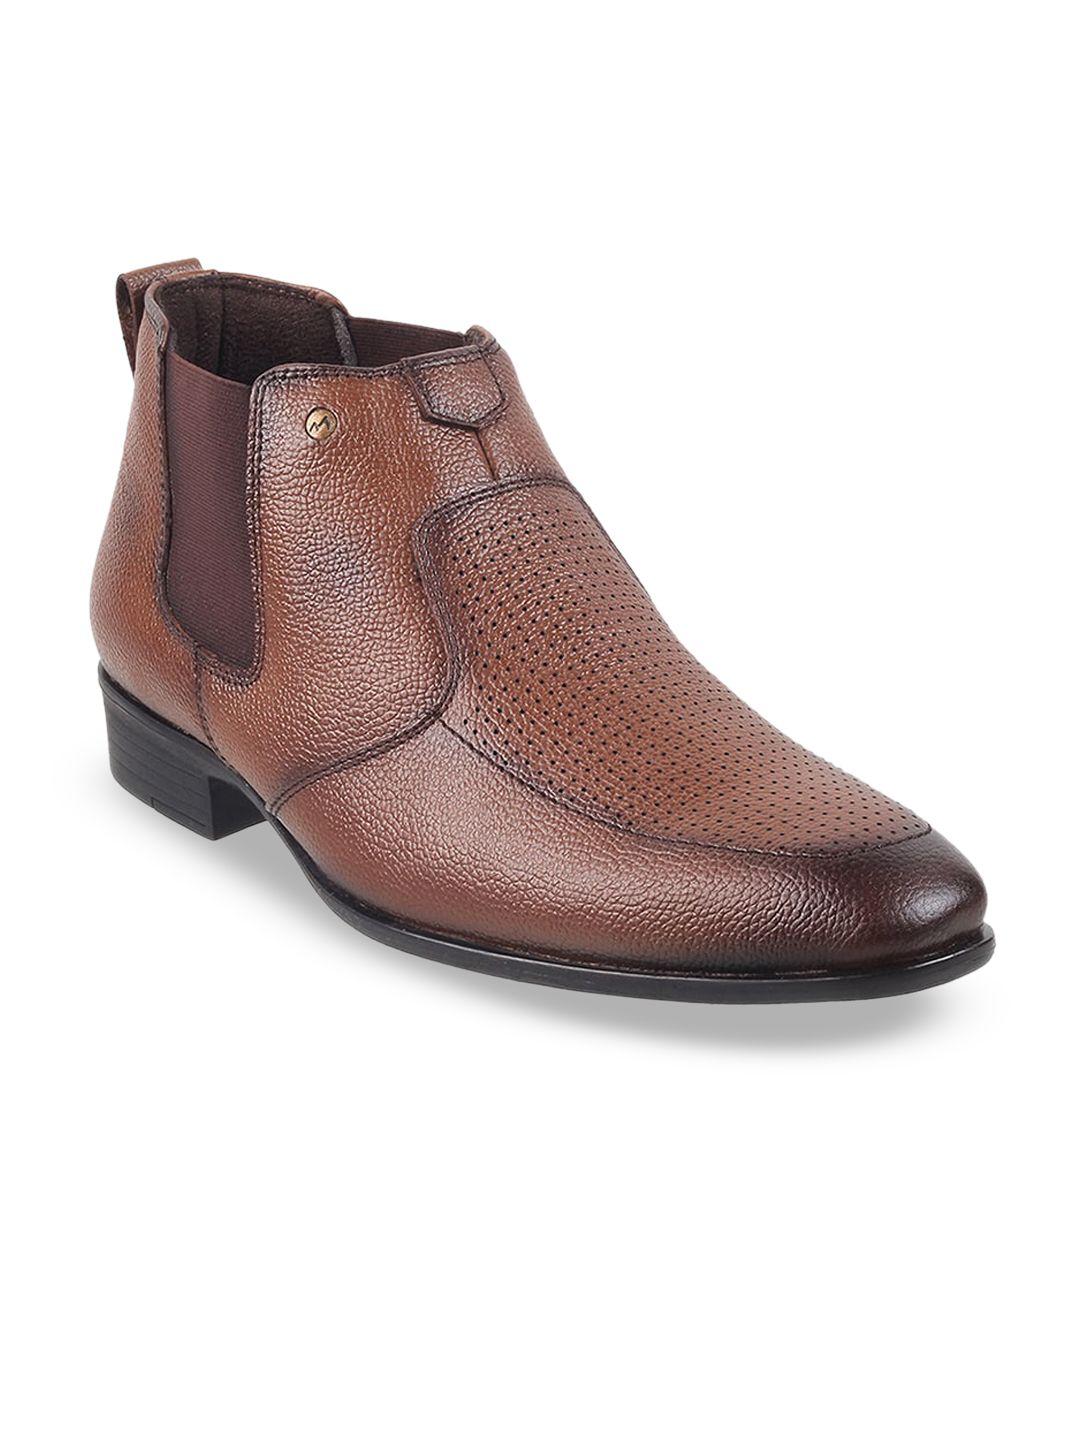 metro men textured leather formal chelsea boots